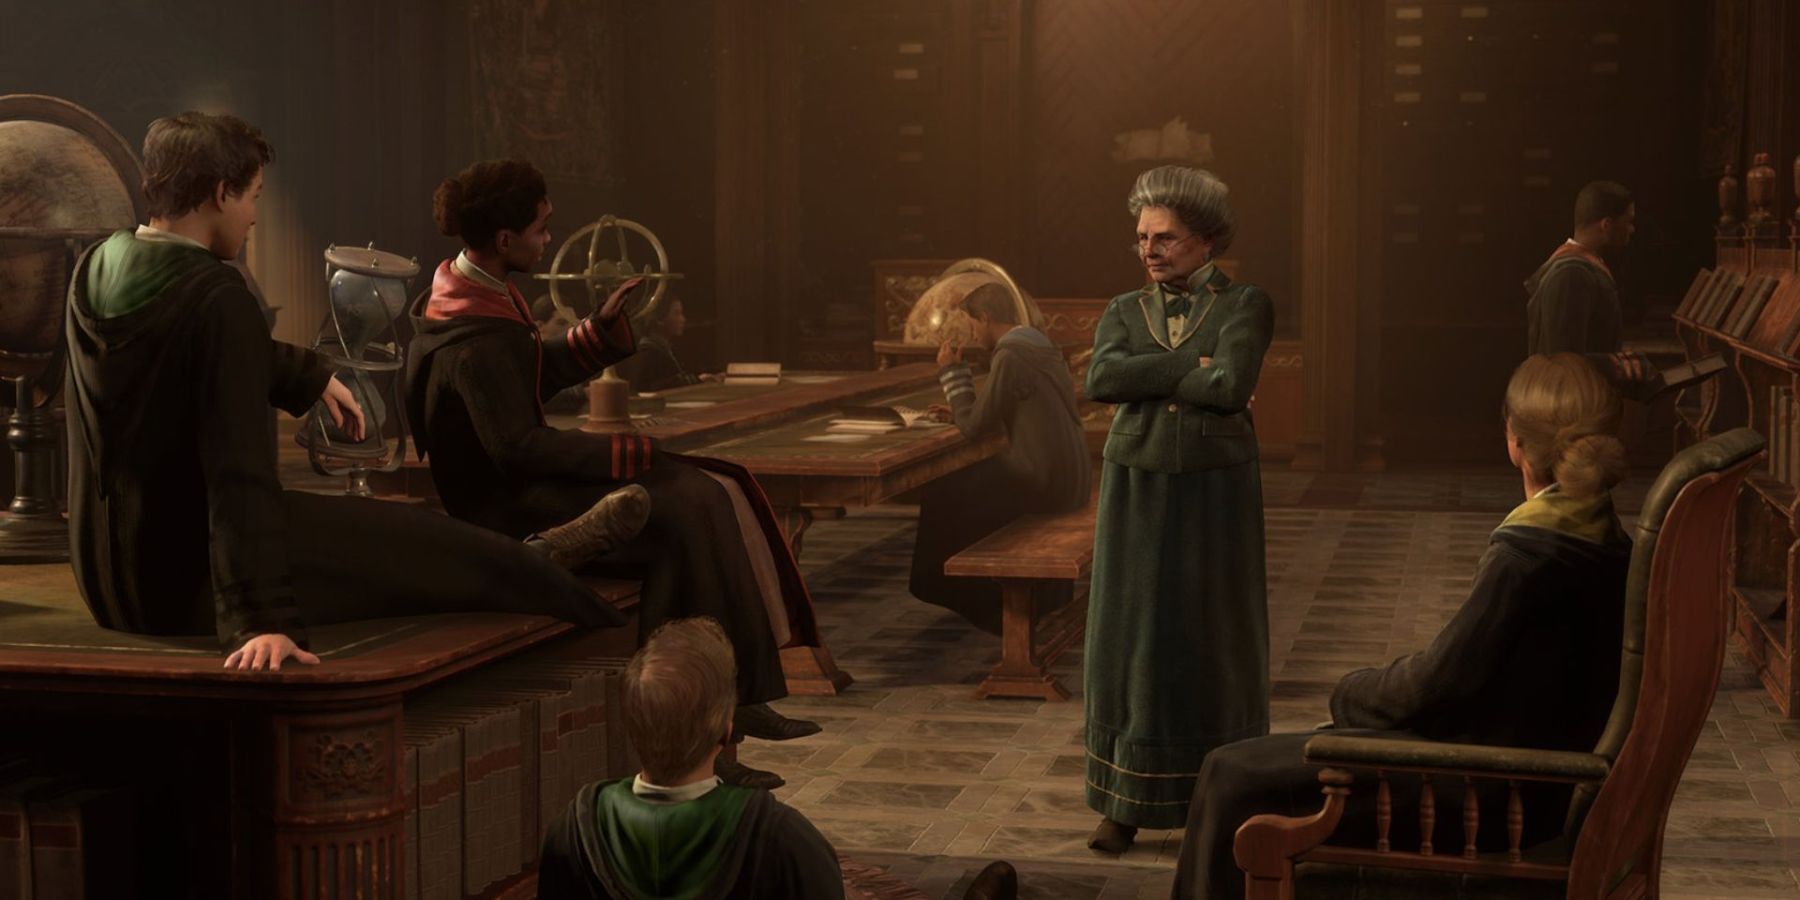 students and a teacher in Hogwarts discussing something